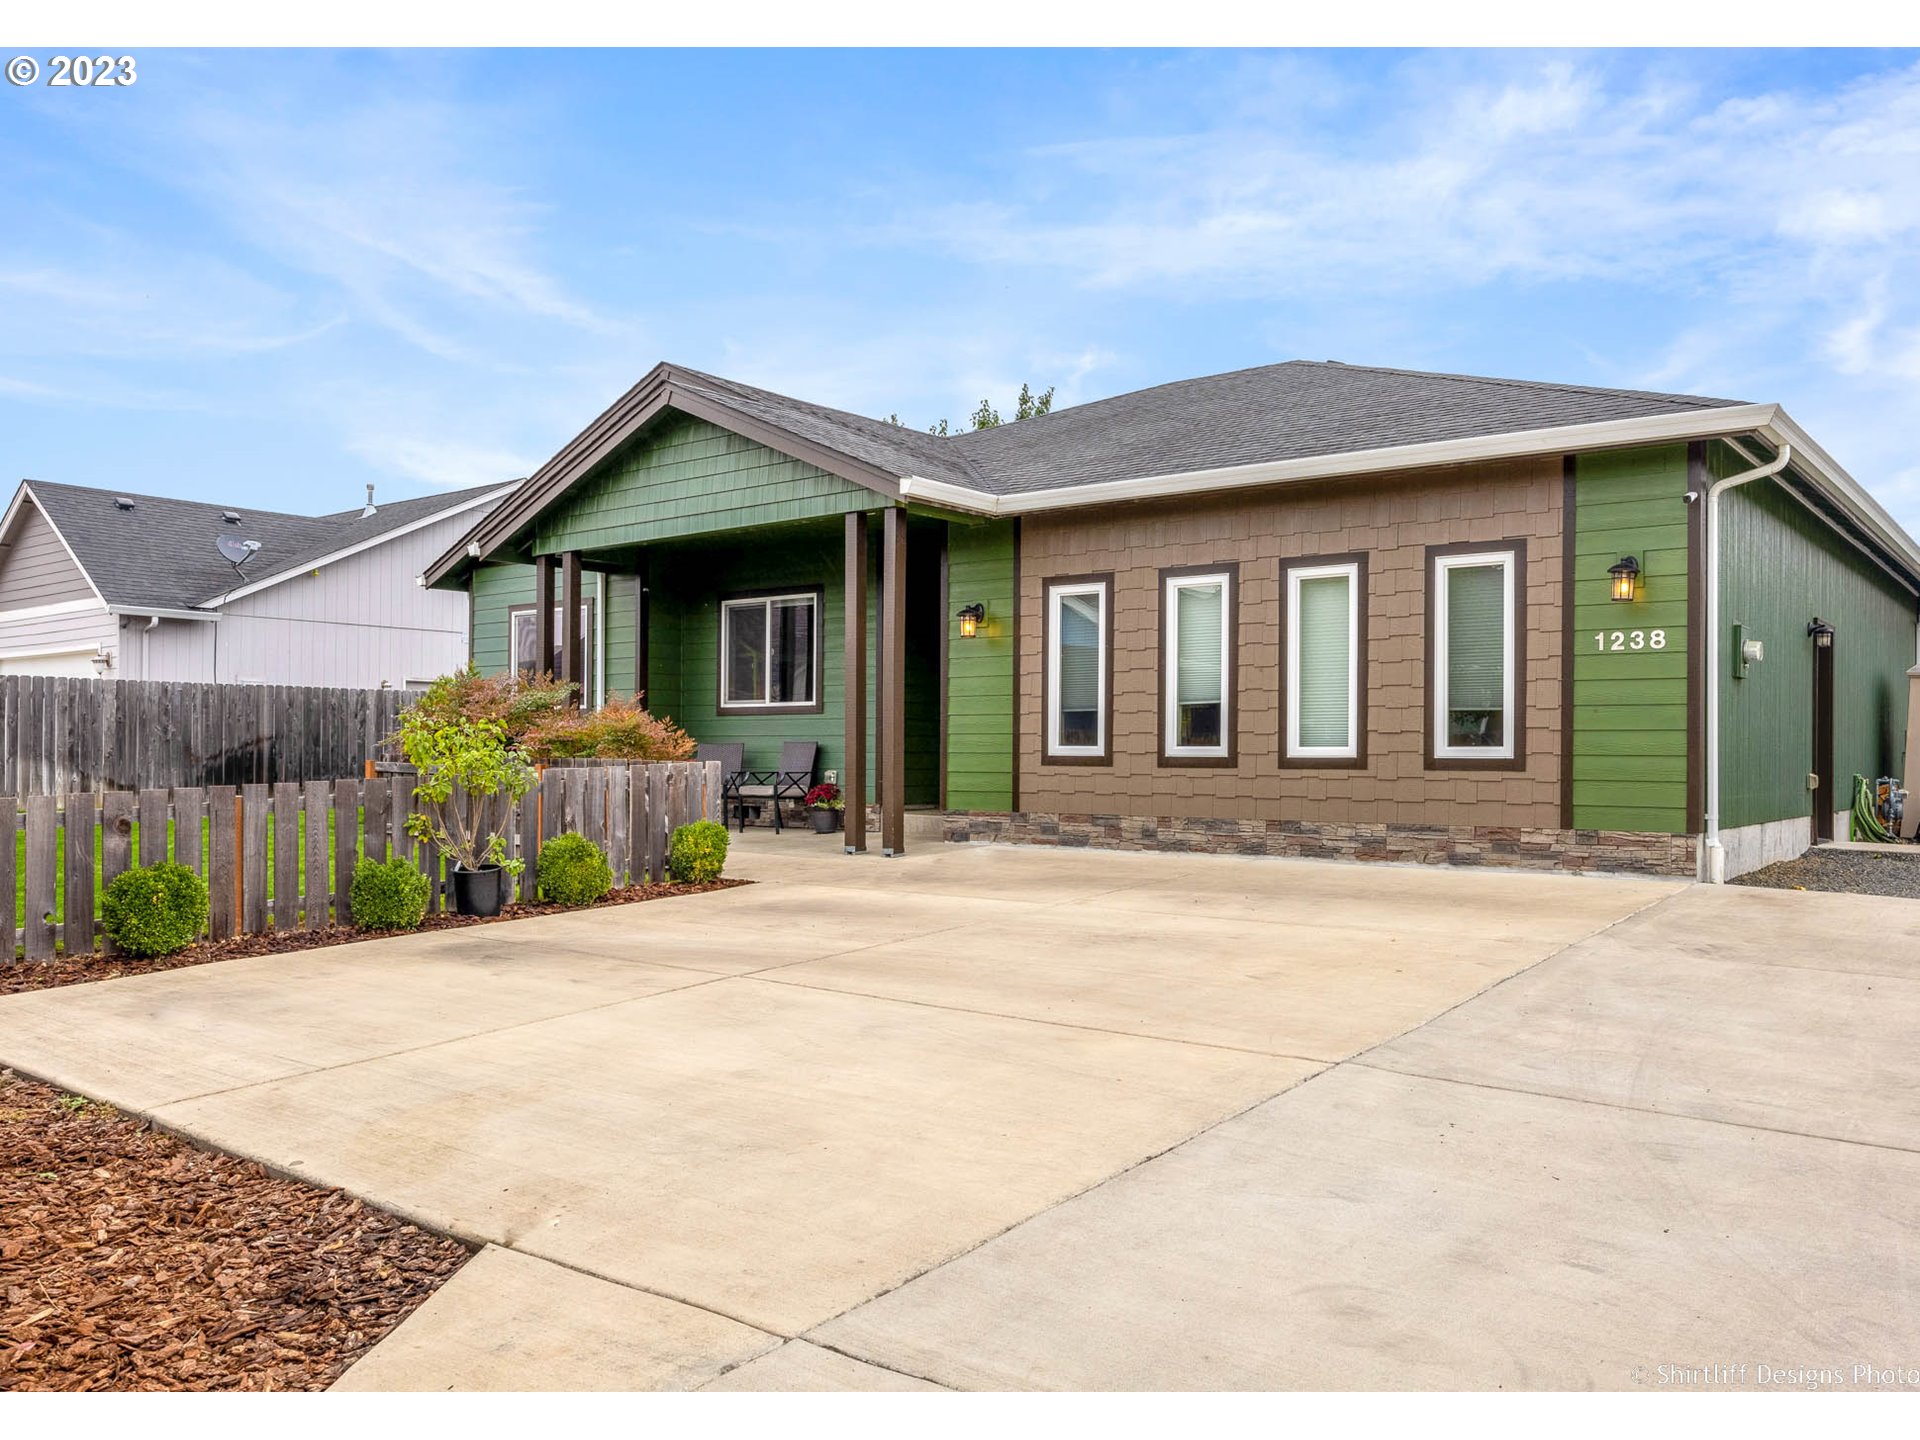 This 4 bedroom home is located in a friendly neighborhood with a short commute to Eugene/Springfield. Built in 2017 this open concept layout home has great separation of space between bedrooms, 9ft ceilings, fenced in yard, private covered patio with a garden and small fish pond, bonus family room with an exterior exit & a separate bedroom (possible in-law suite or multi generation living), large pantry, stainless steel appliances, interior workshop/storage room, RV parking, outdoor tool shed & many more features. Contact your agent today to schedule a showing and make this home yours!!